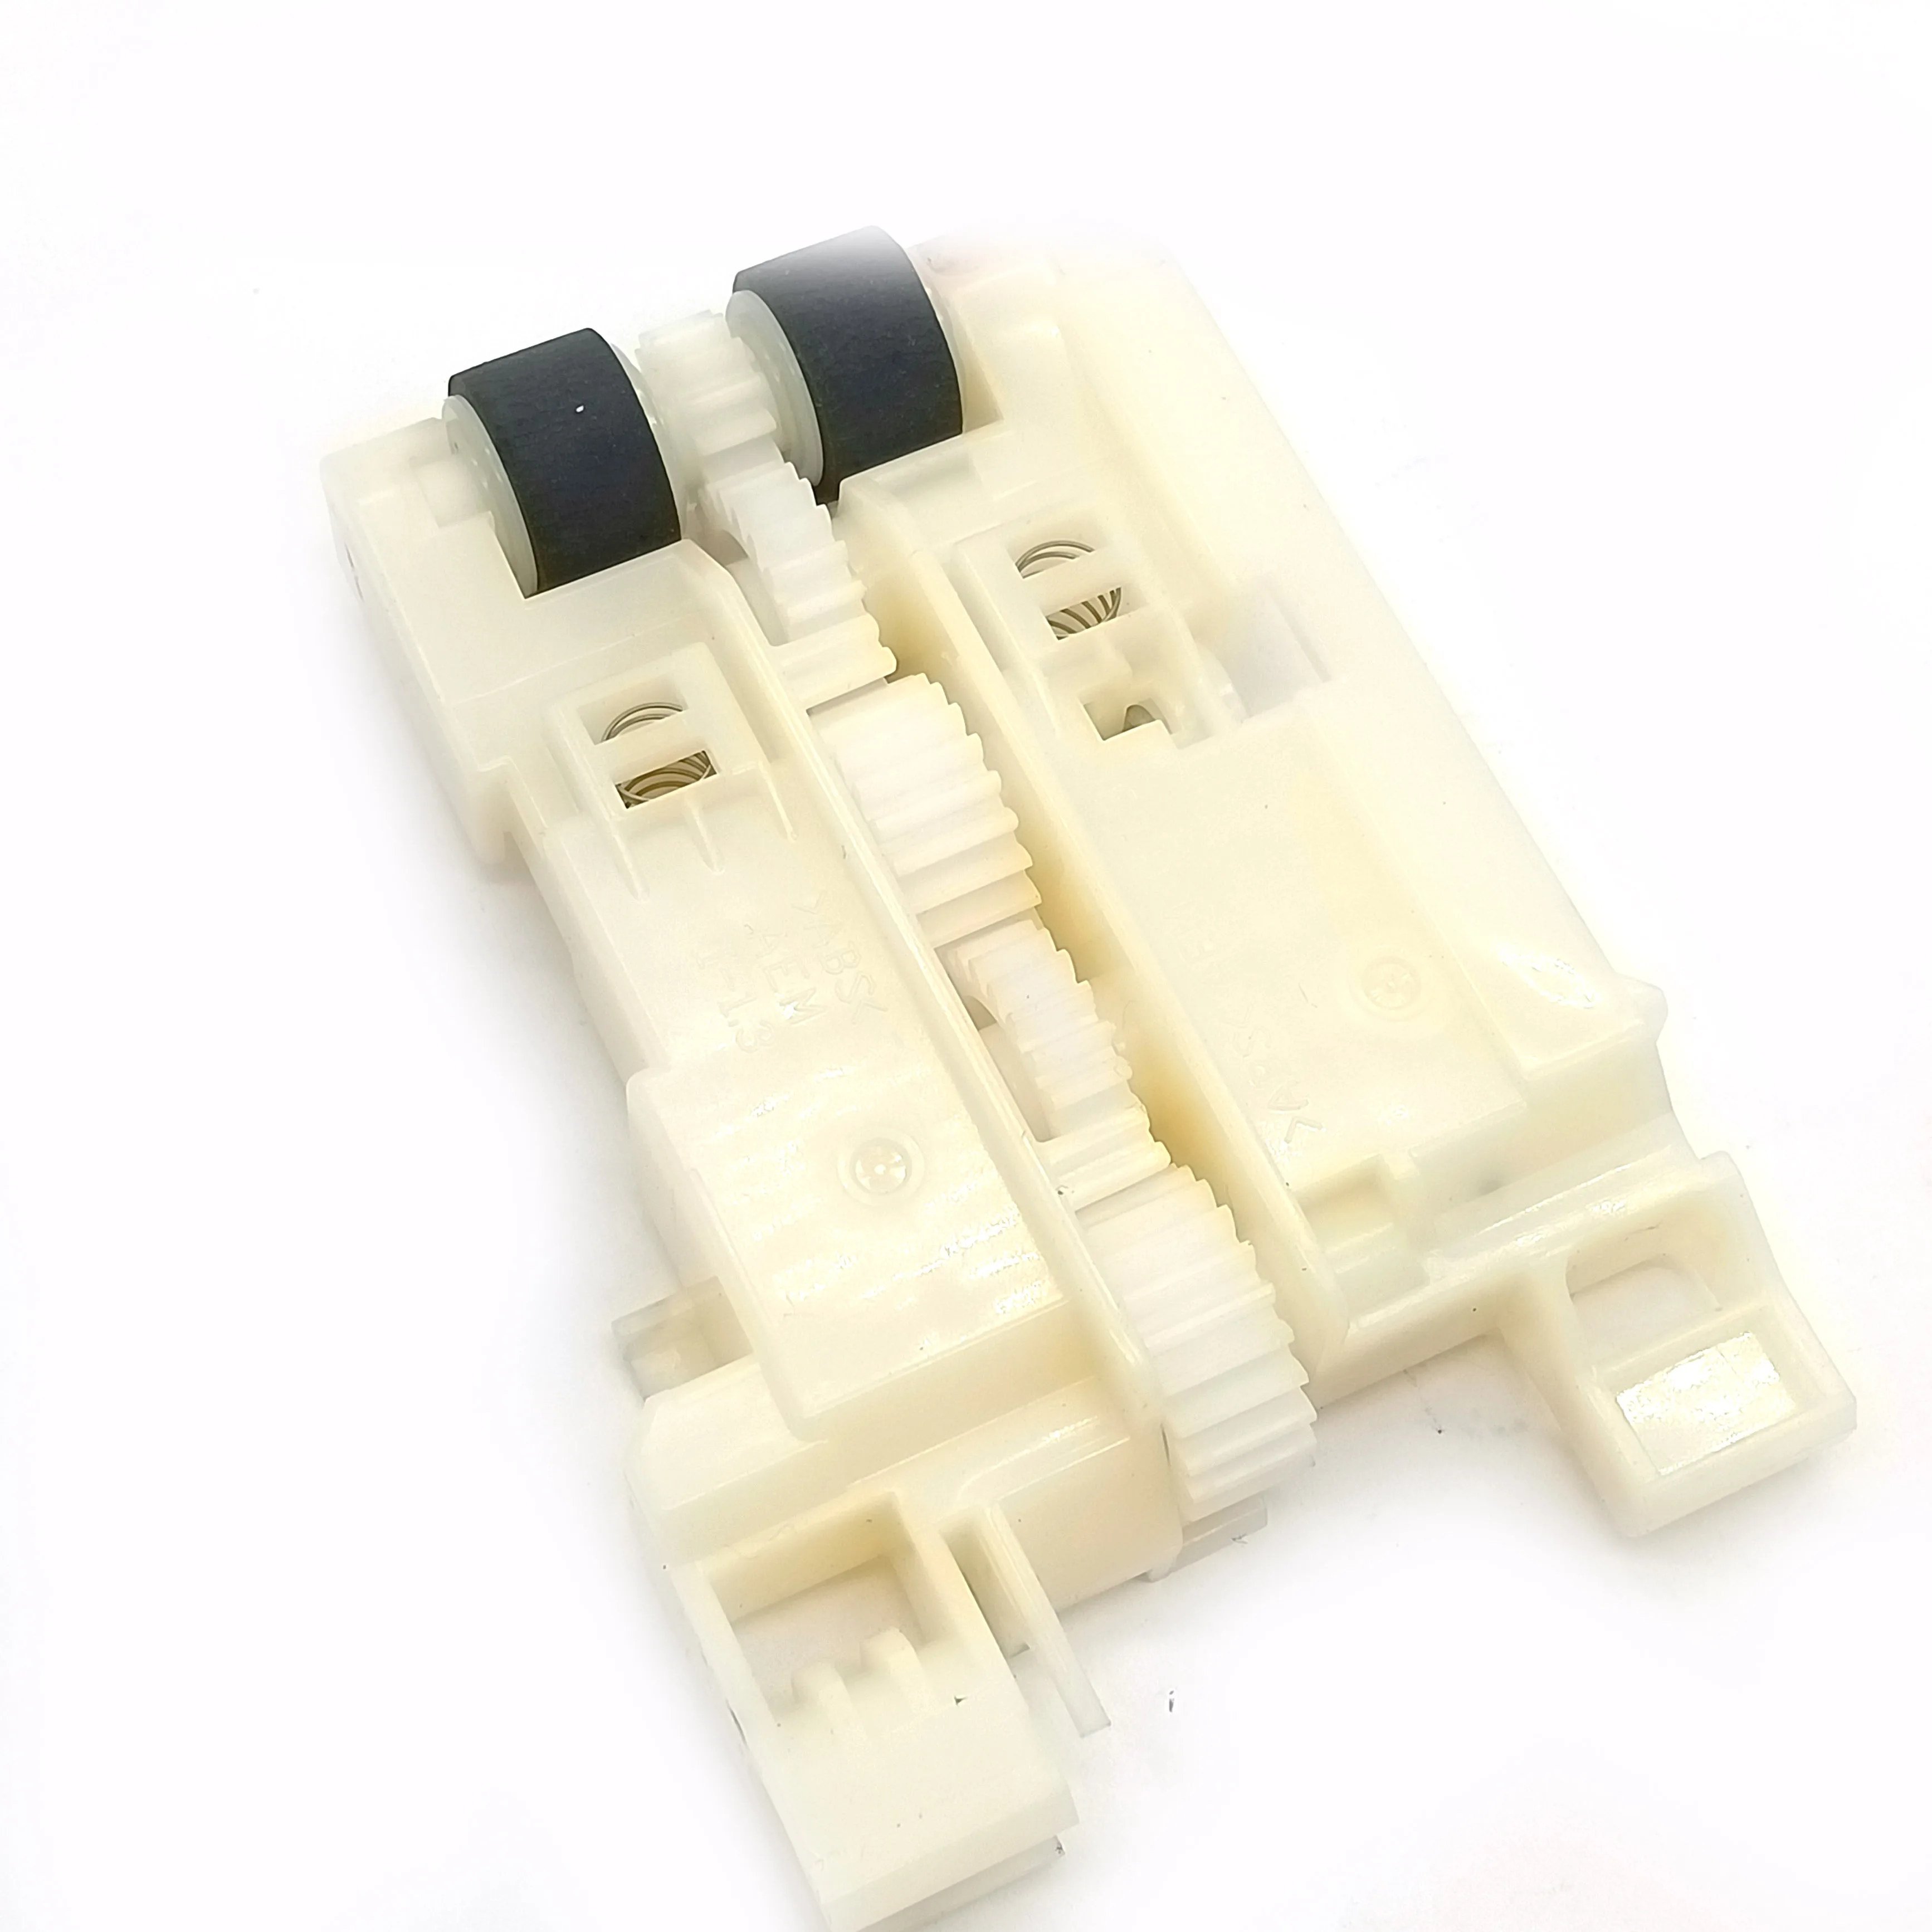 

Pickup Roller Fits For Epson XP 750 820 721 630 801 850 720 701 830 620 600 605 810 615 601 640 635 625 897 610 821 800 700